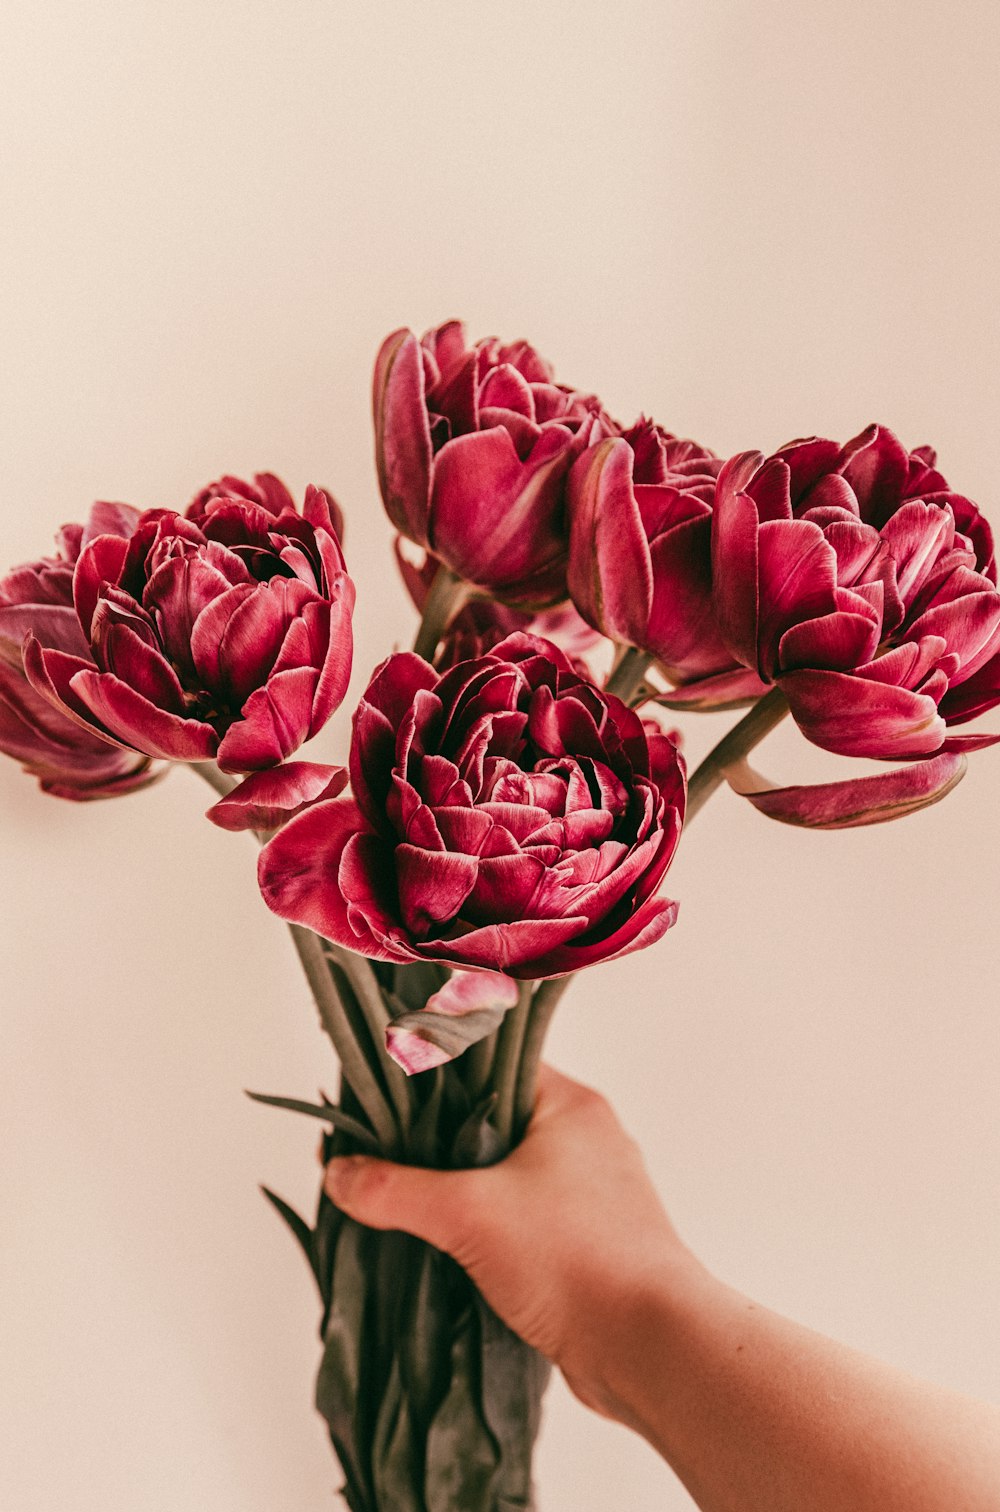 person holding red tulips in close up photography